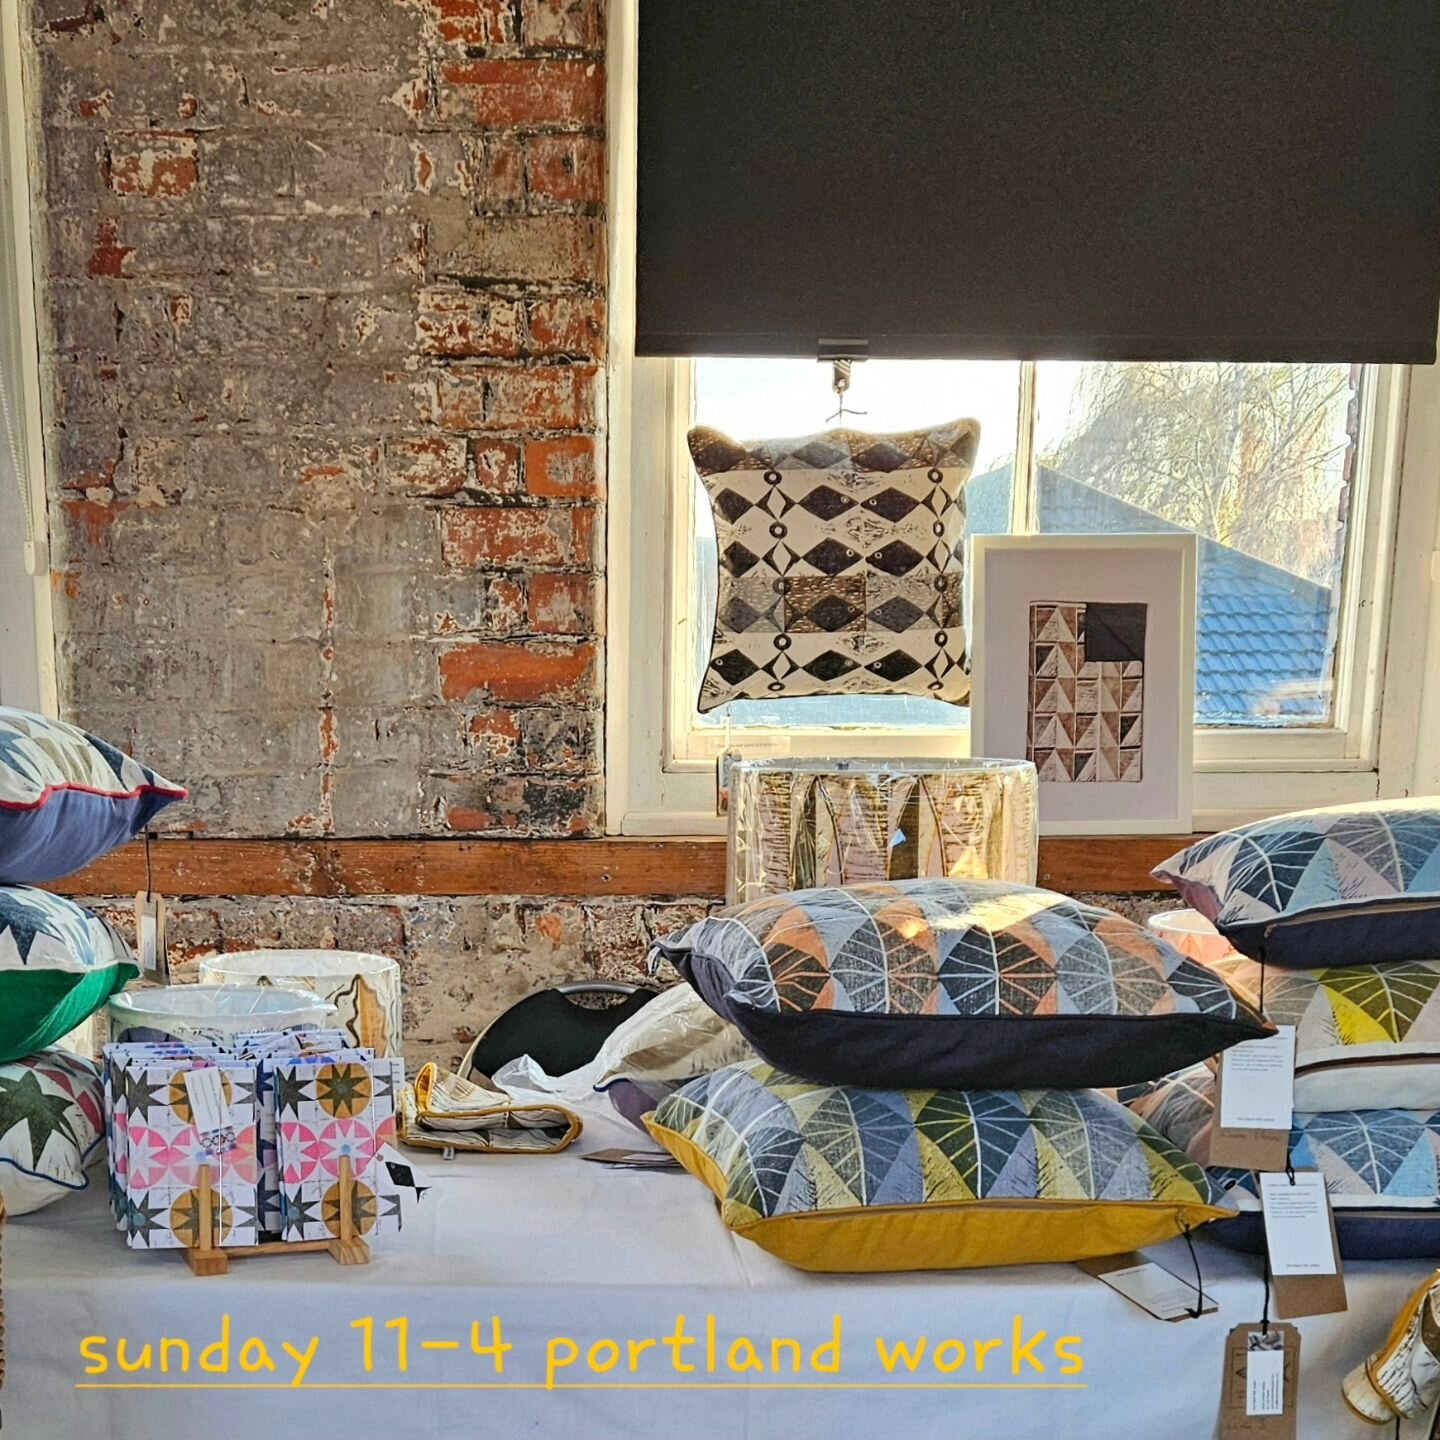 Setting up today in the Makersplace @portlandworks for Sunday's open art studios and stalls. What fantastic brick walls!  The colours and textures are beautiful - couldn't resist posing a cushion. #brickwalls #sheffieldheritagebuilding #sheffieldeven